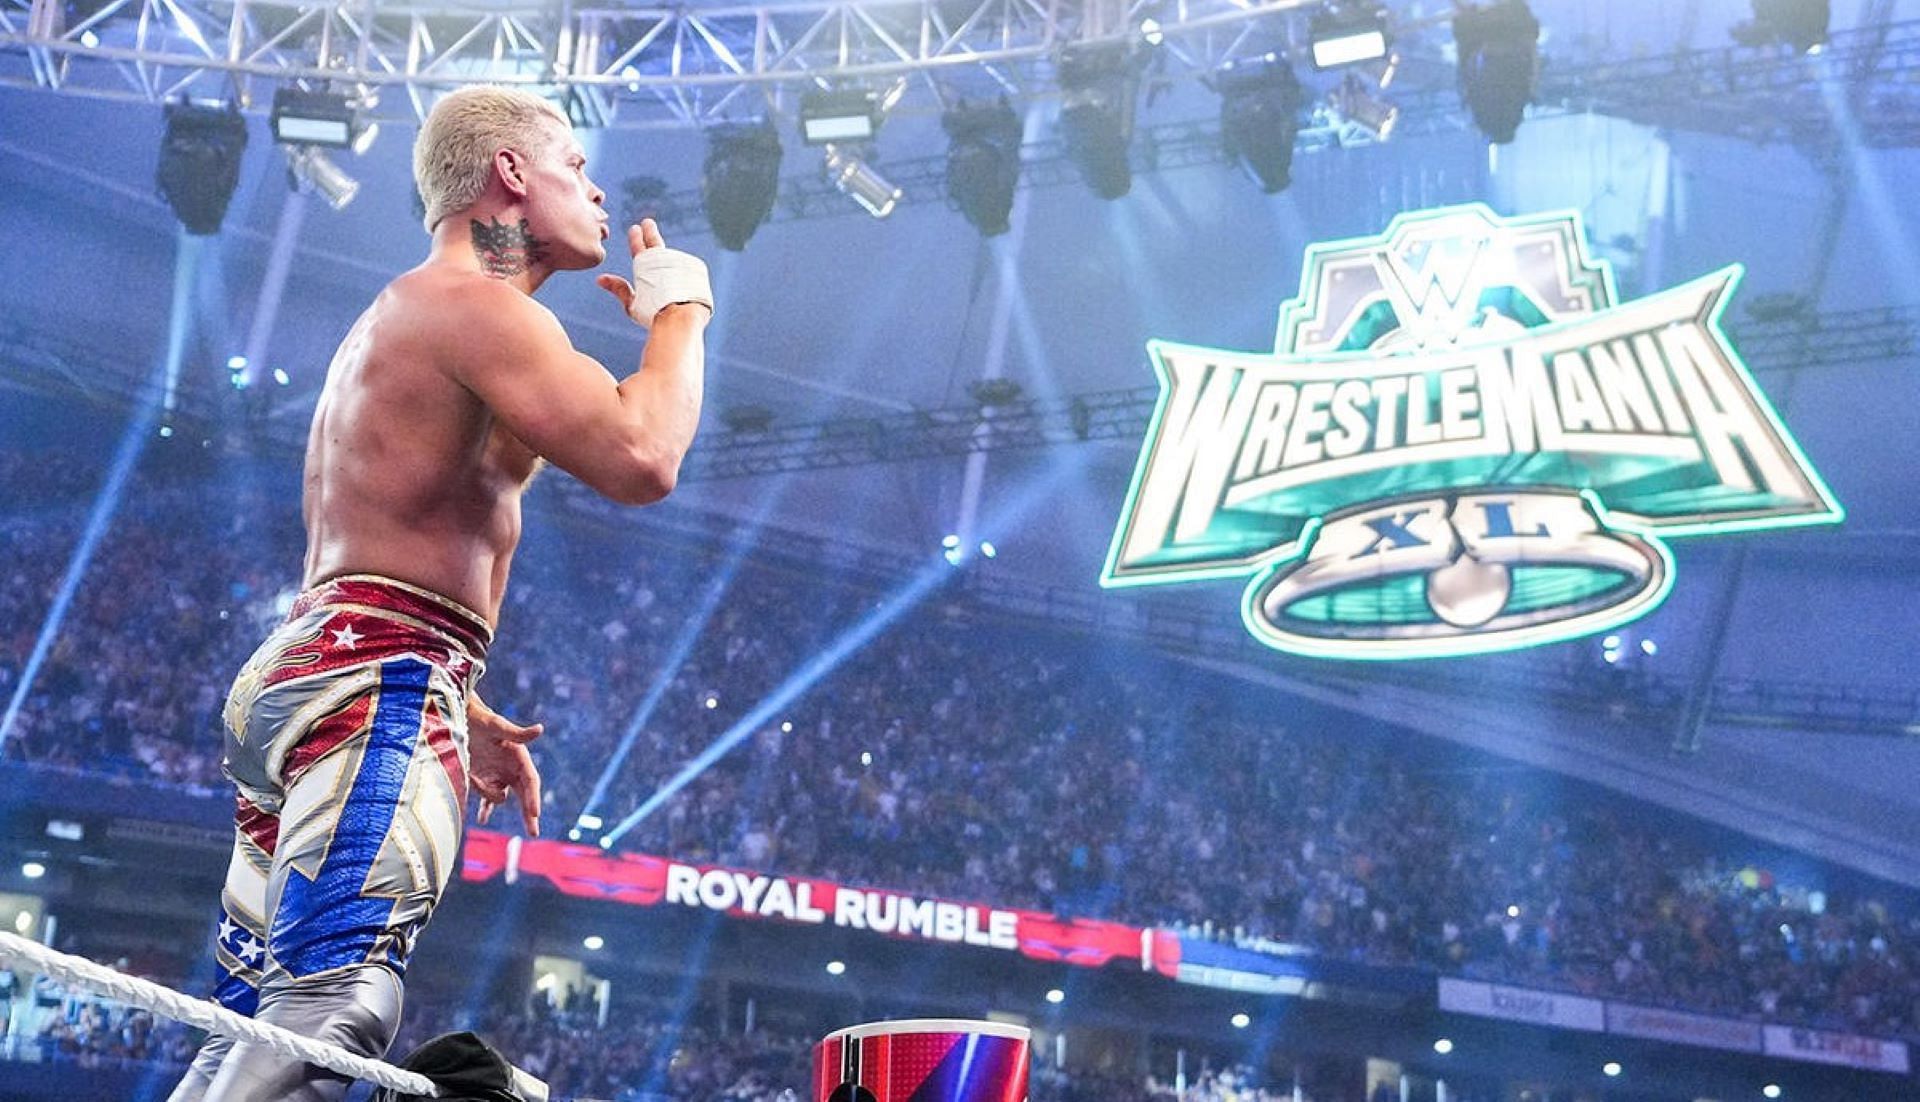 Cody Rhodes has another shot at glory at WrestleMania 40.